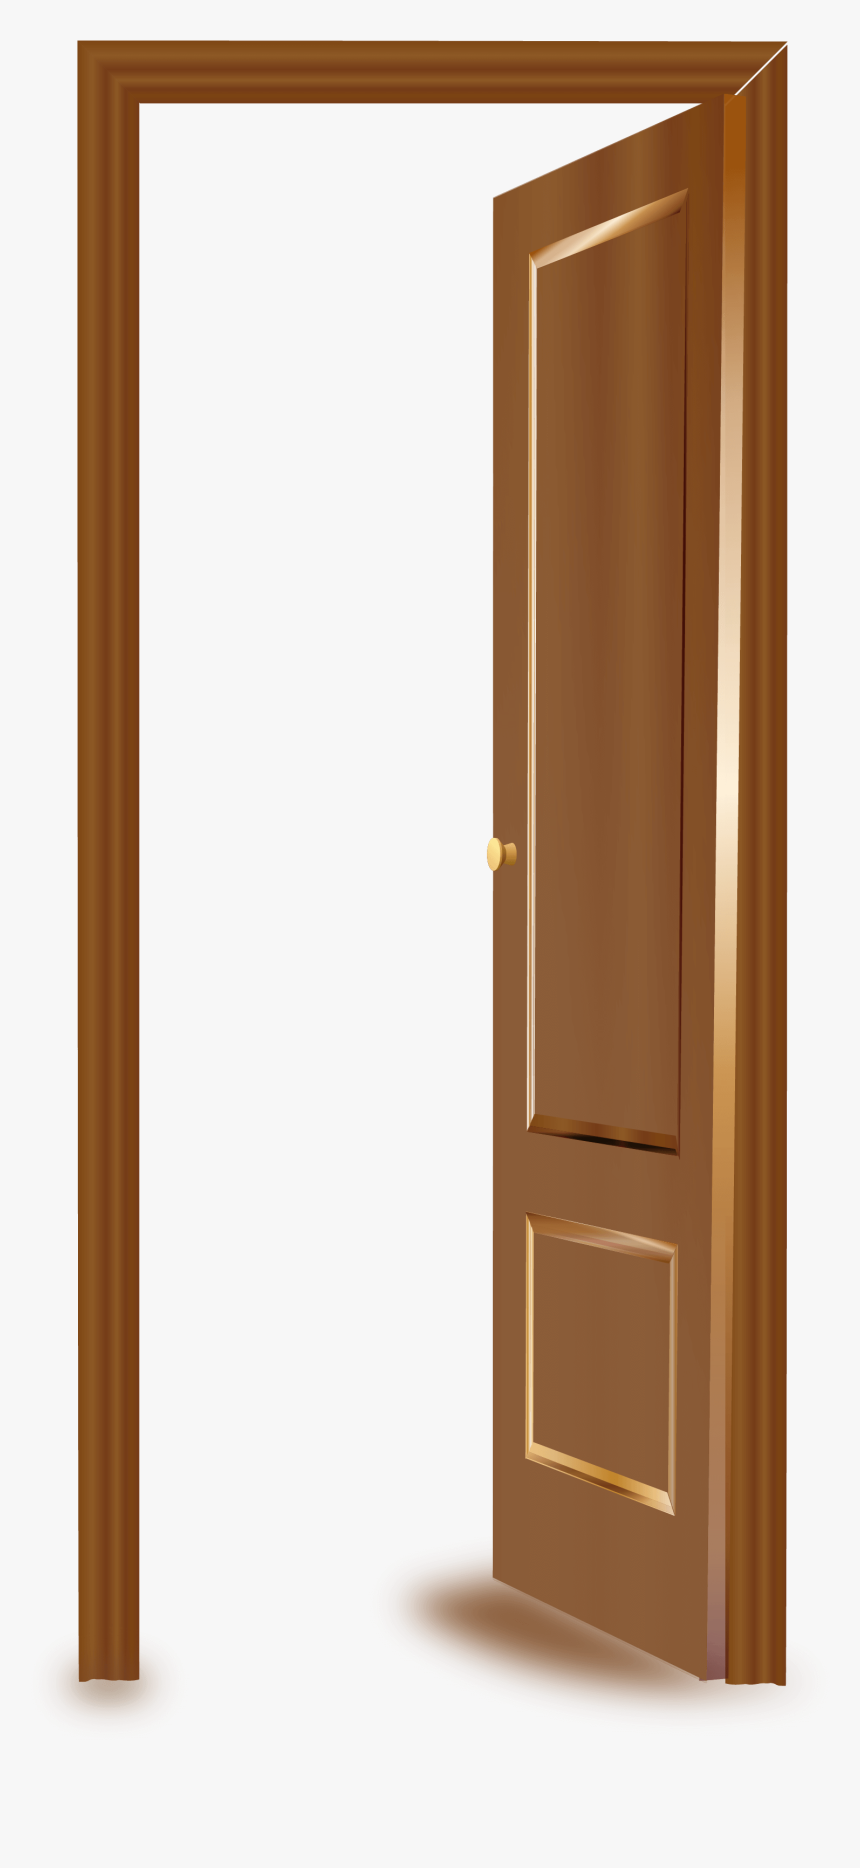 Xyloid Synthatic Wood - Wooden Door Frame Png, Transparent Png, Free Download